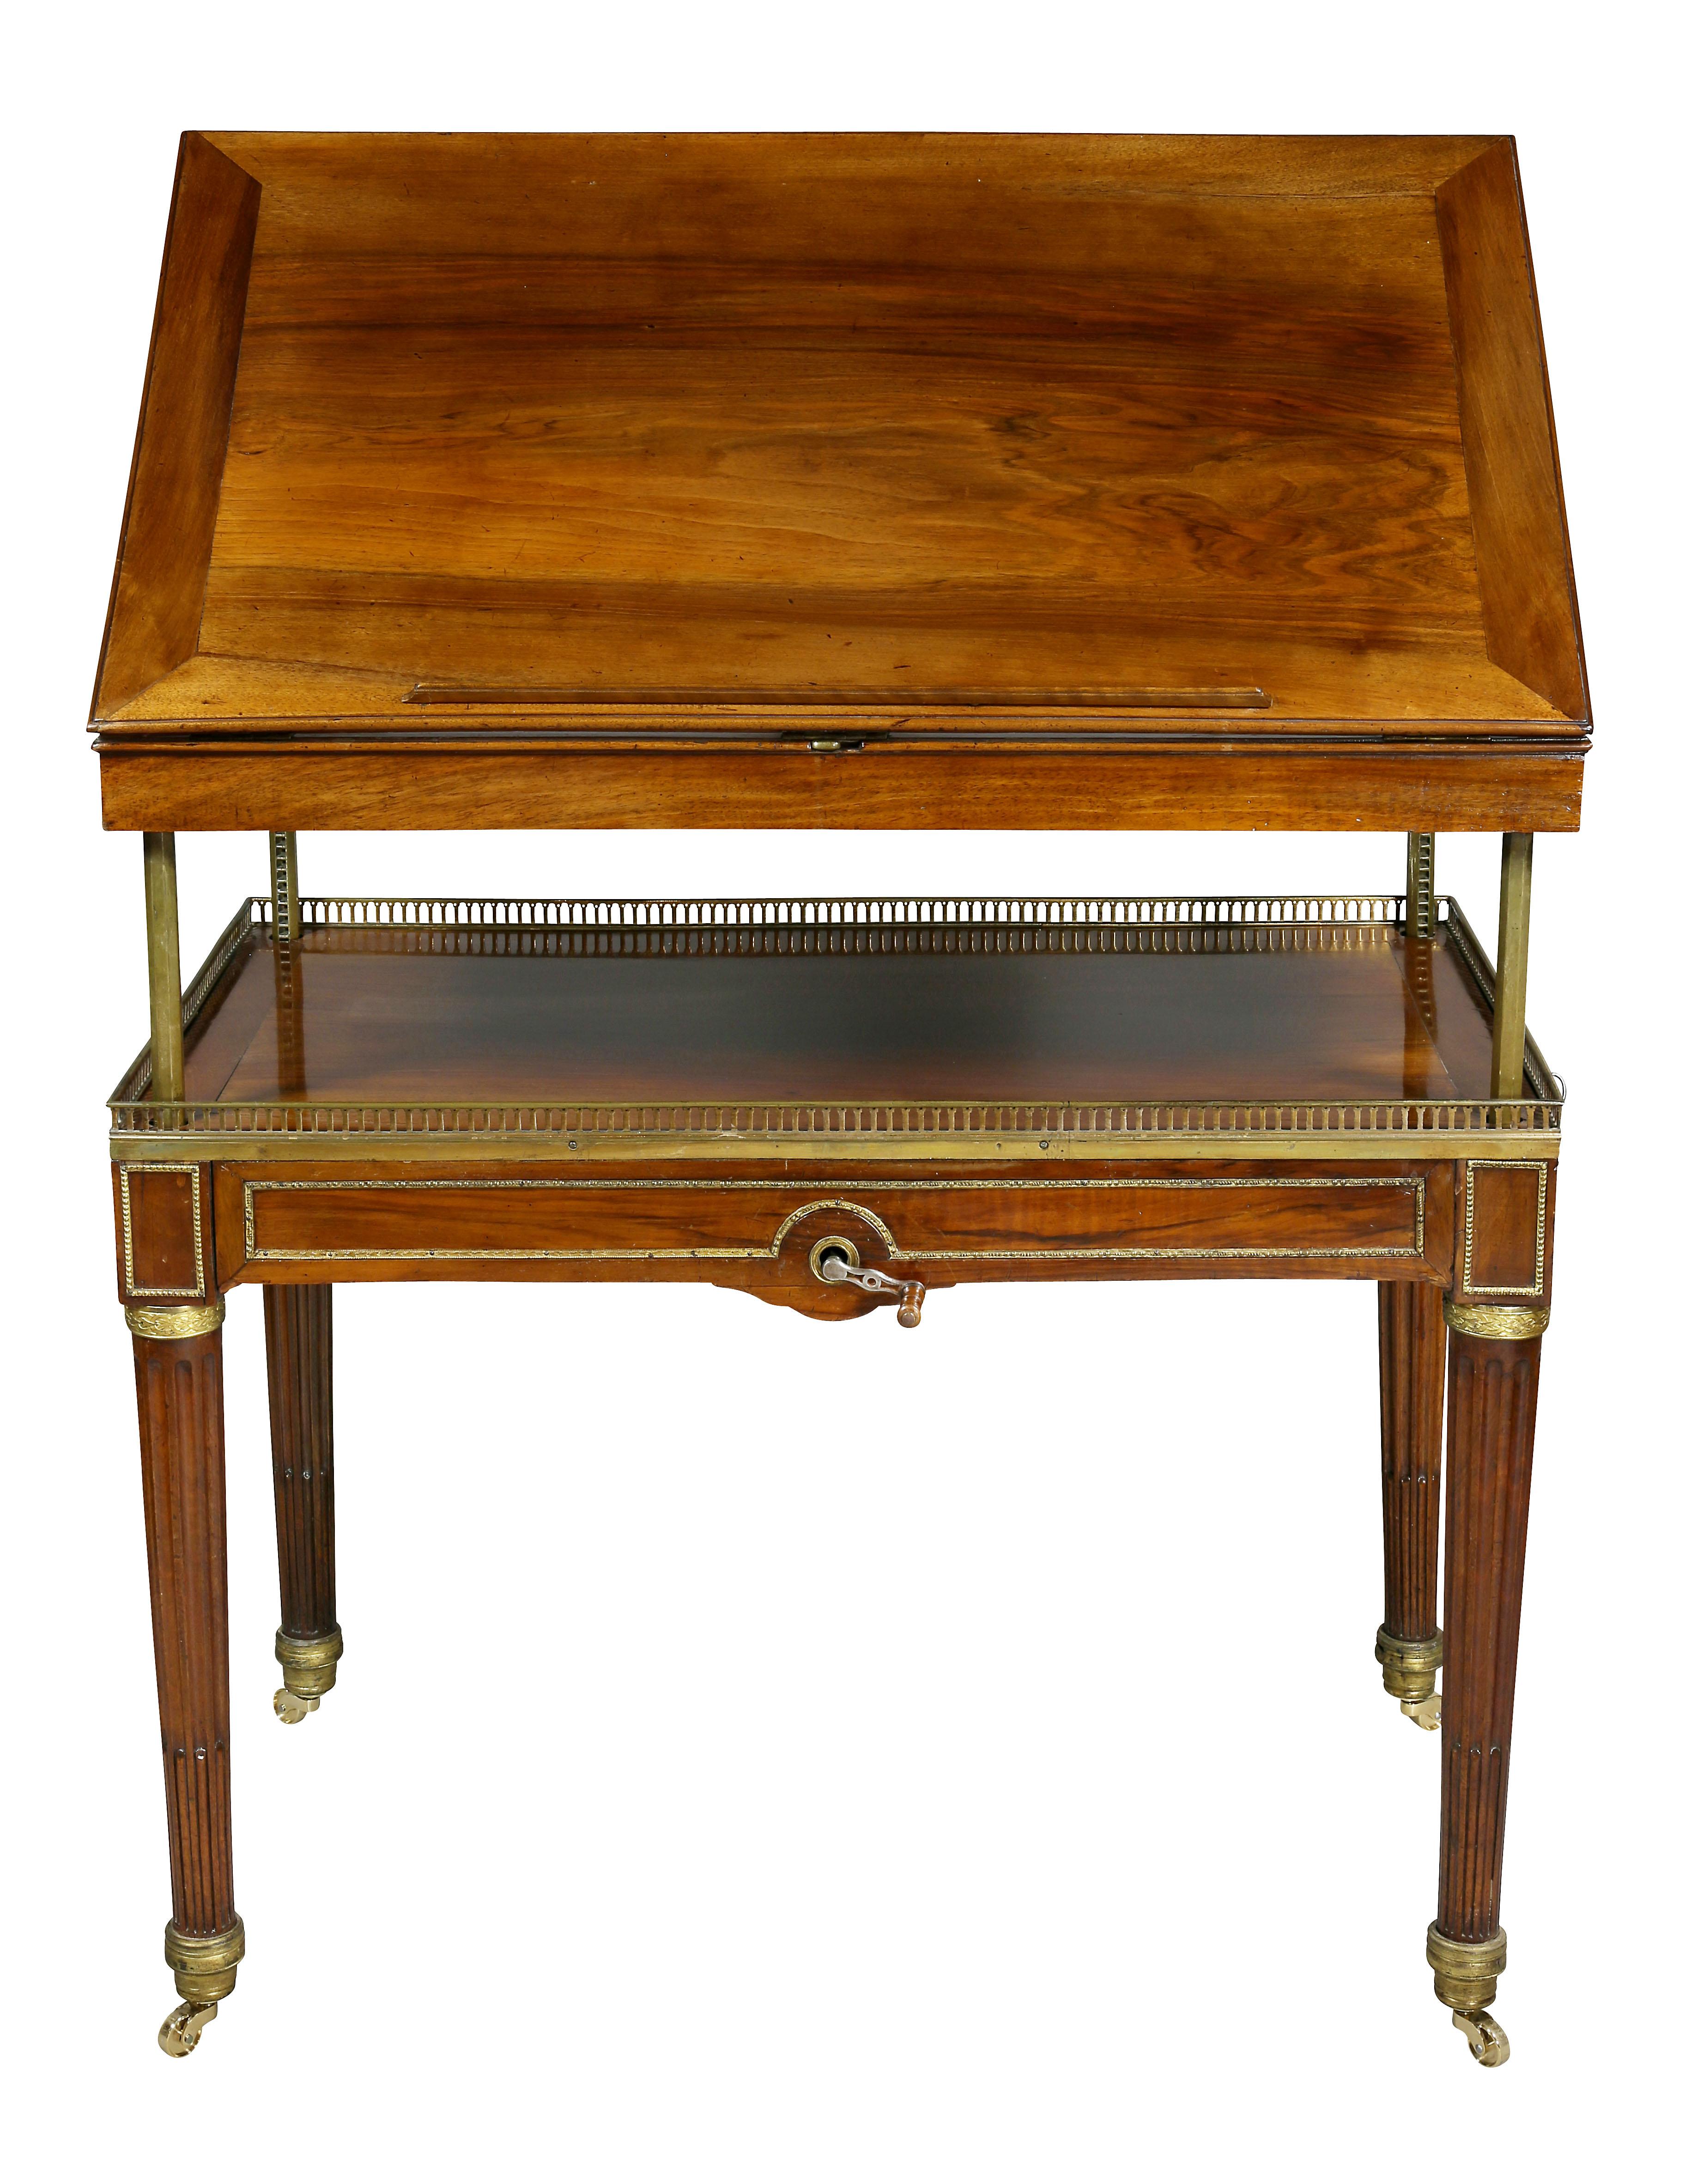 A fine and unusual piece with gilt bronze mounts, when in table position rectangular with a ratcheted adjustable slant lid , a winding key raised and lowers the reading, working section, brass bars are set inside legs and raise and lower within it.